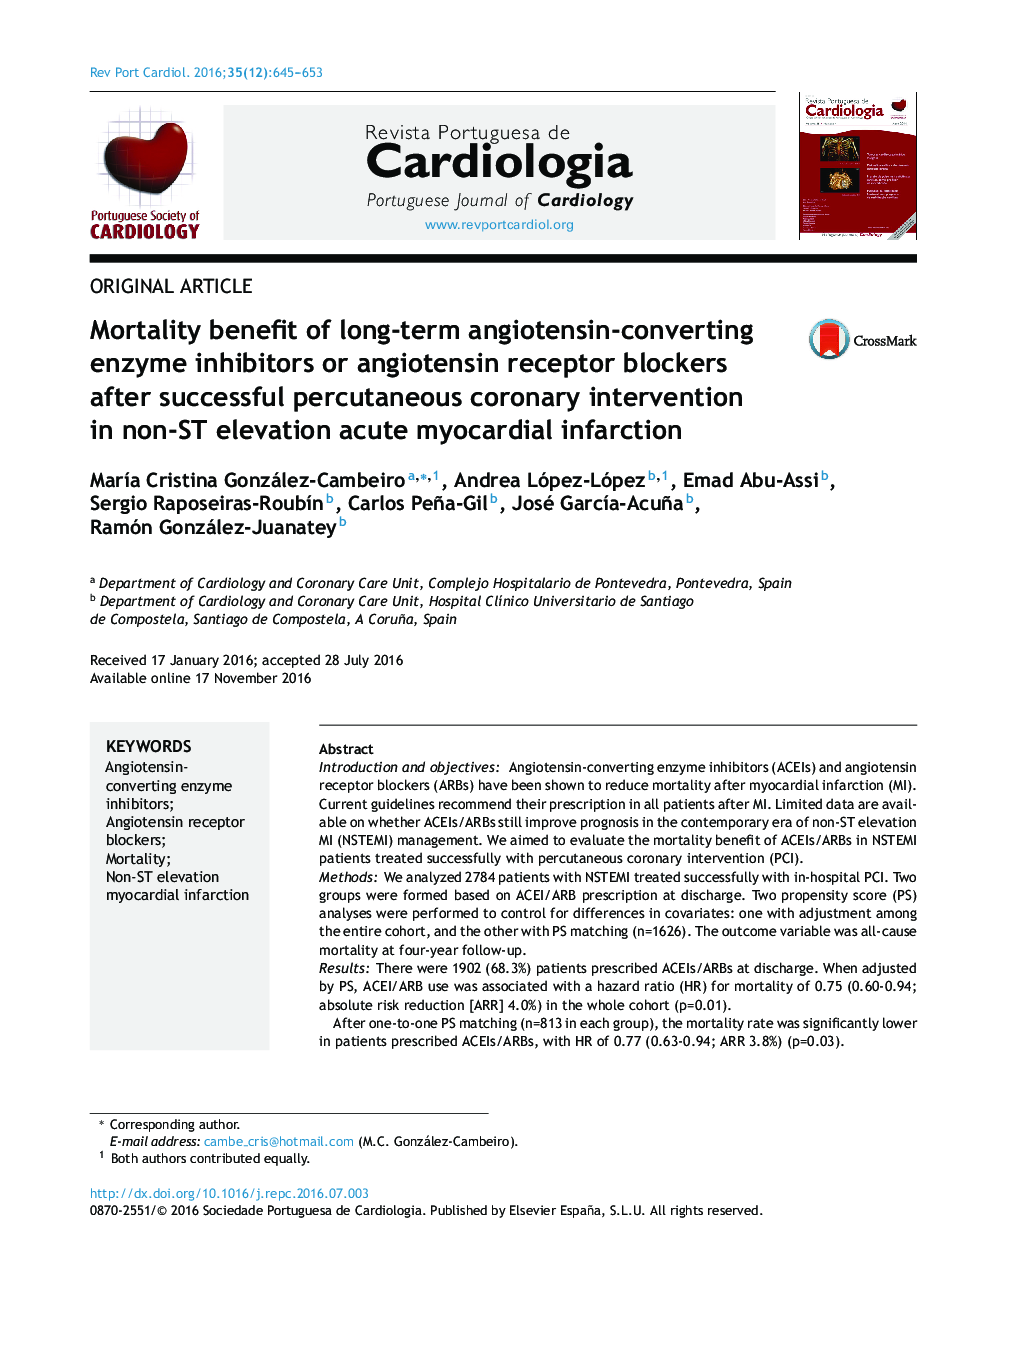 Mortality benefit of long-term angiotensin-converting enzyme inhibitors or angiotensin receptor blockers after successful percutaneous coronary intervention in non-ST elevation acute myocardial infarction